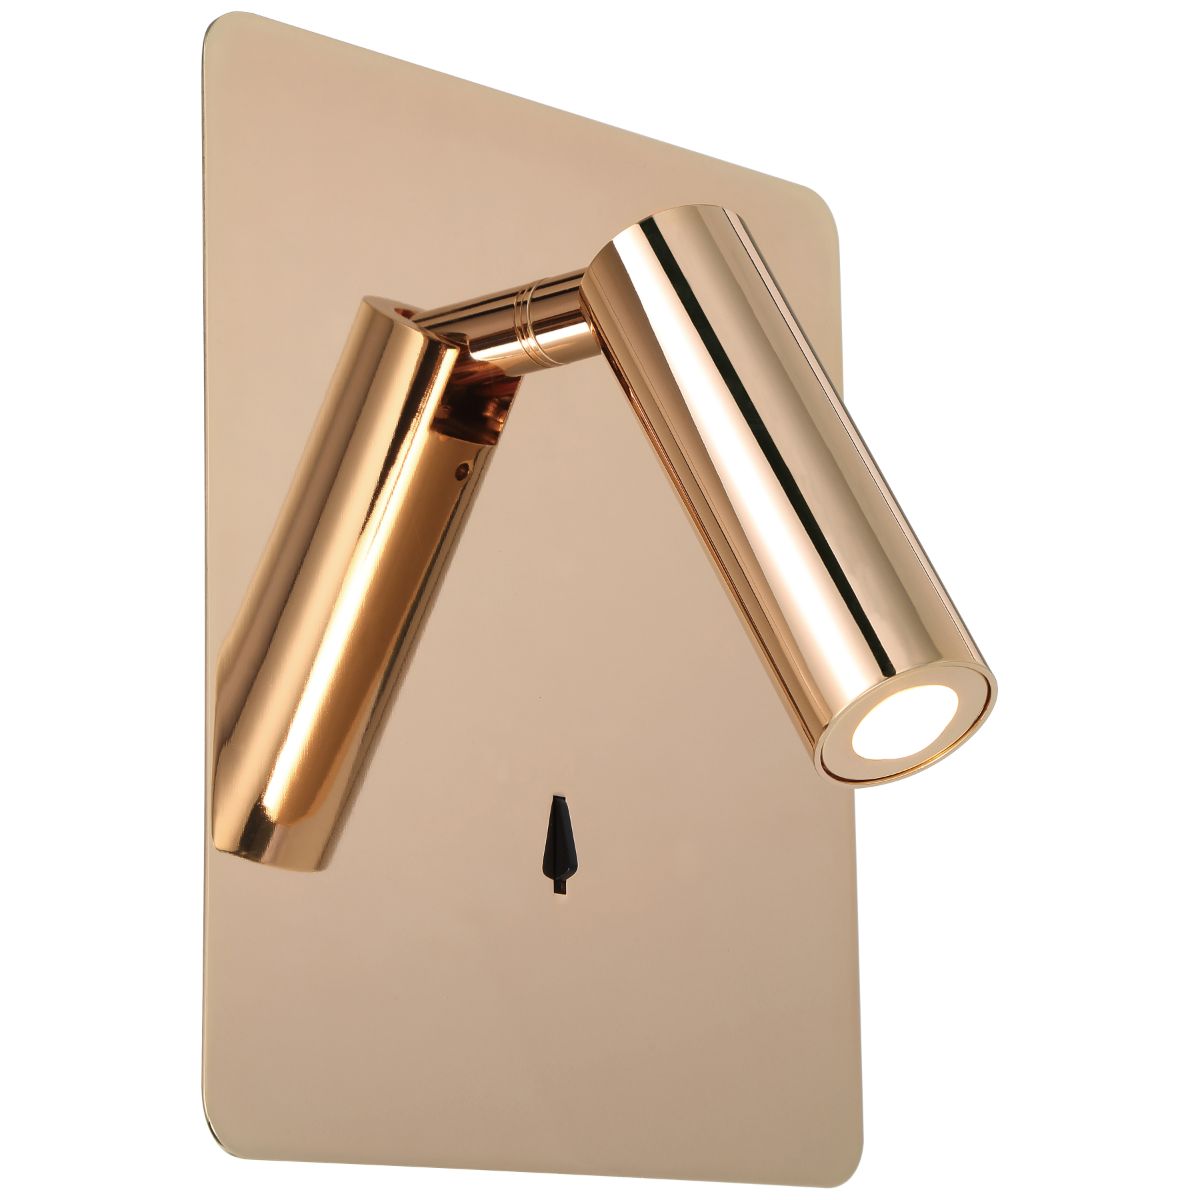 Villa 8 in. LED Directional Armed Sconce